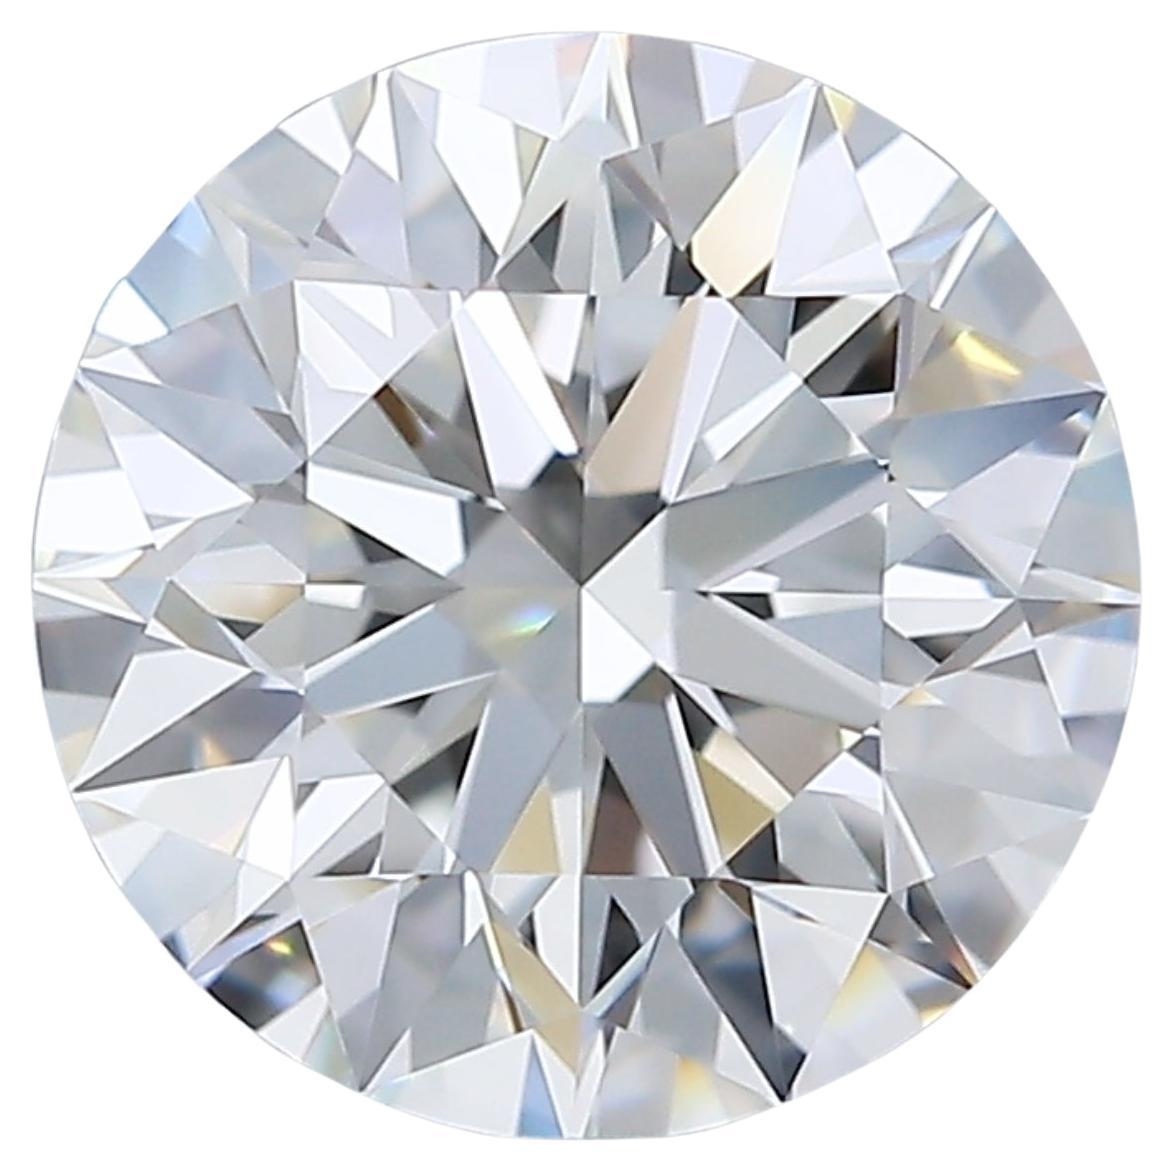 Bright 2.01ct Triple Excellent Ideal Cut Diamond - GIA Certified